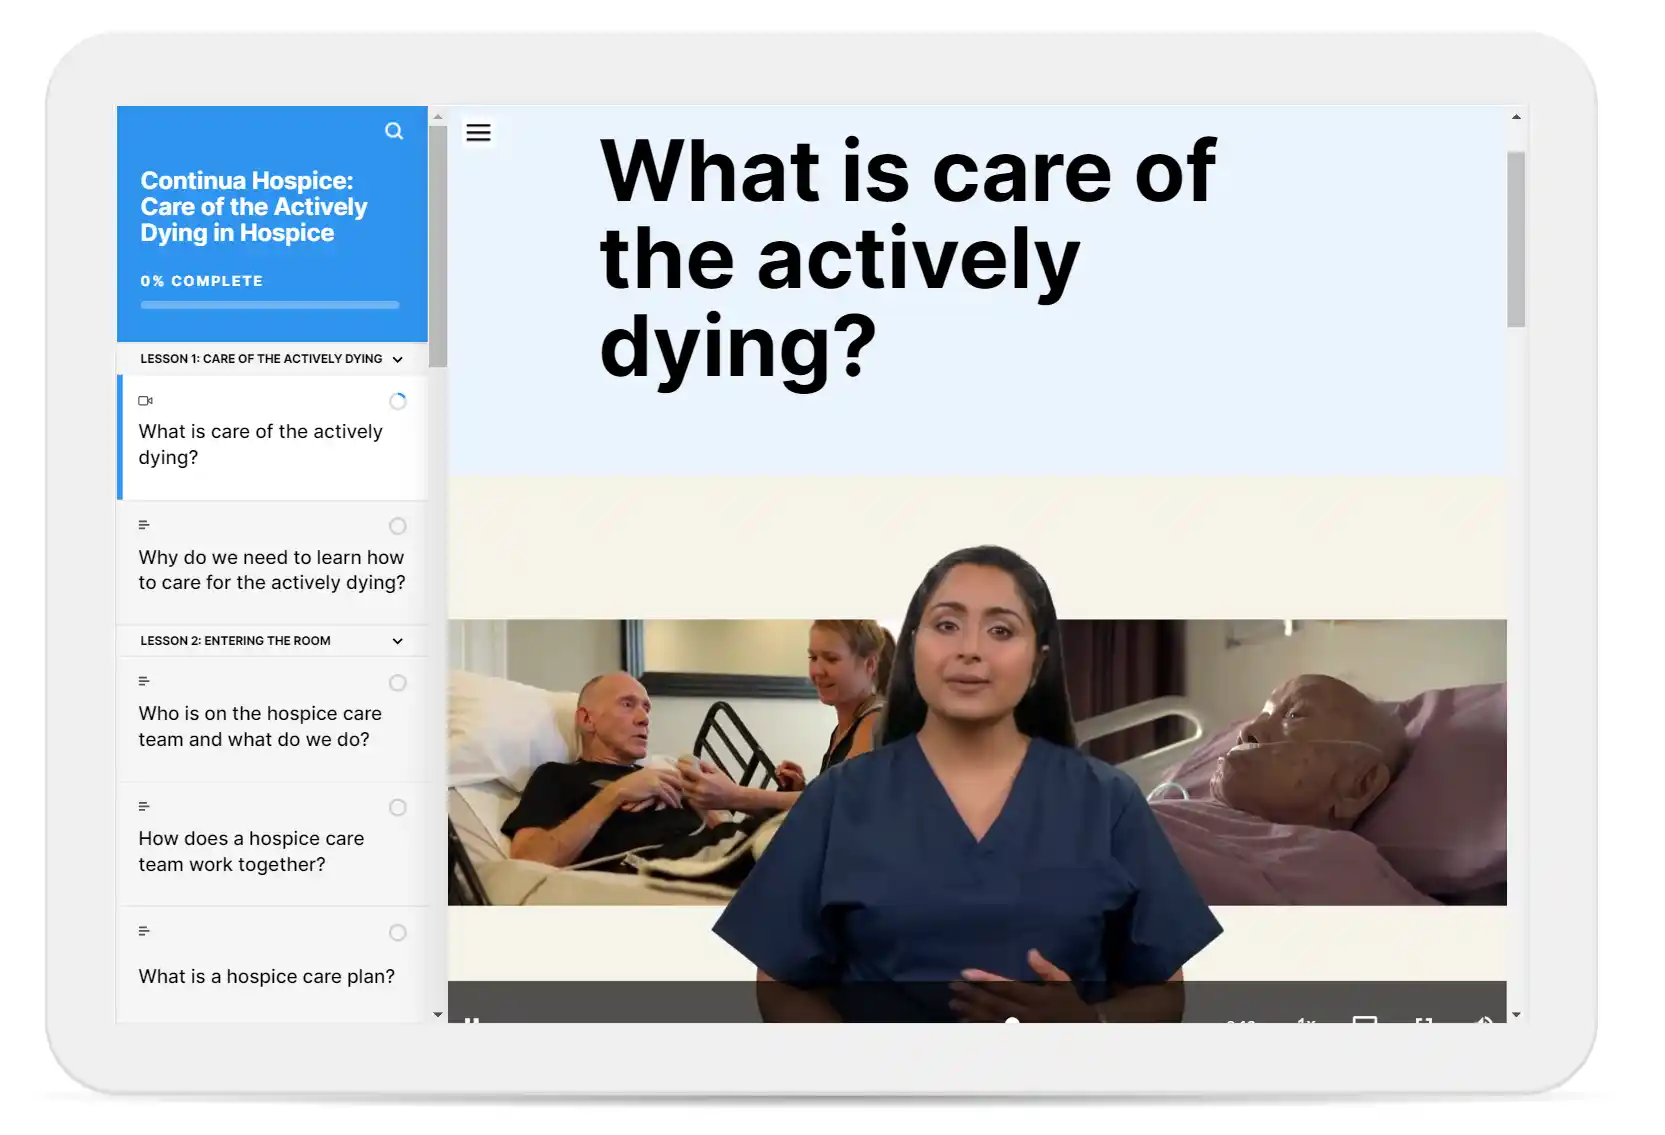 Care of the Actively Dying videos